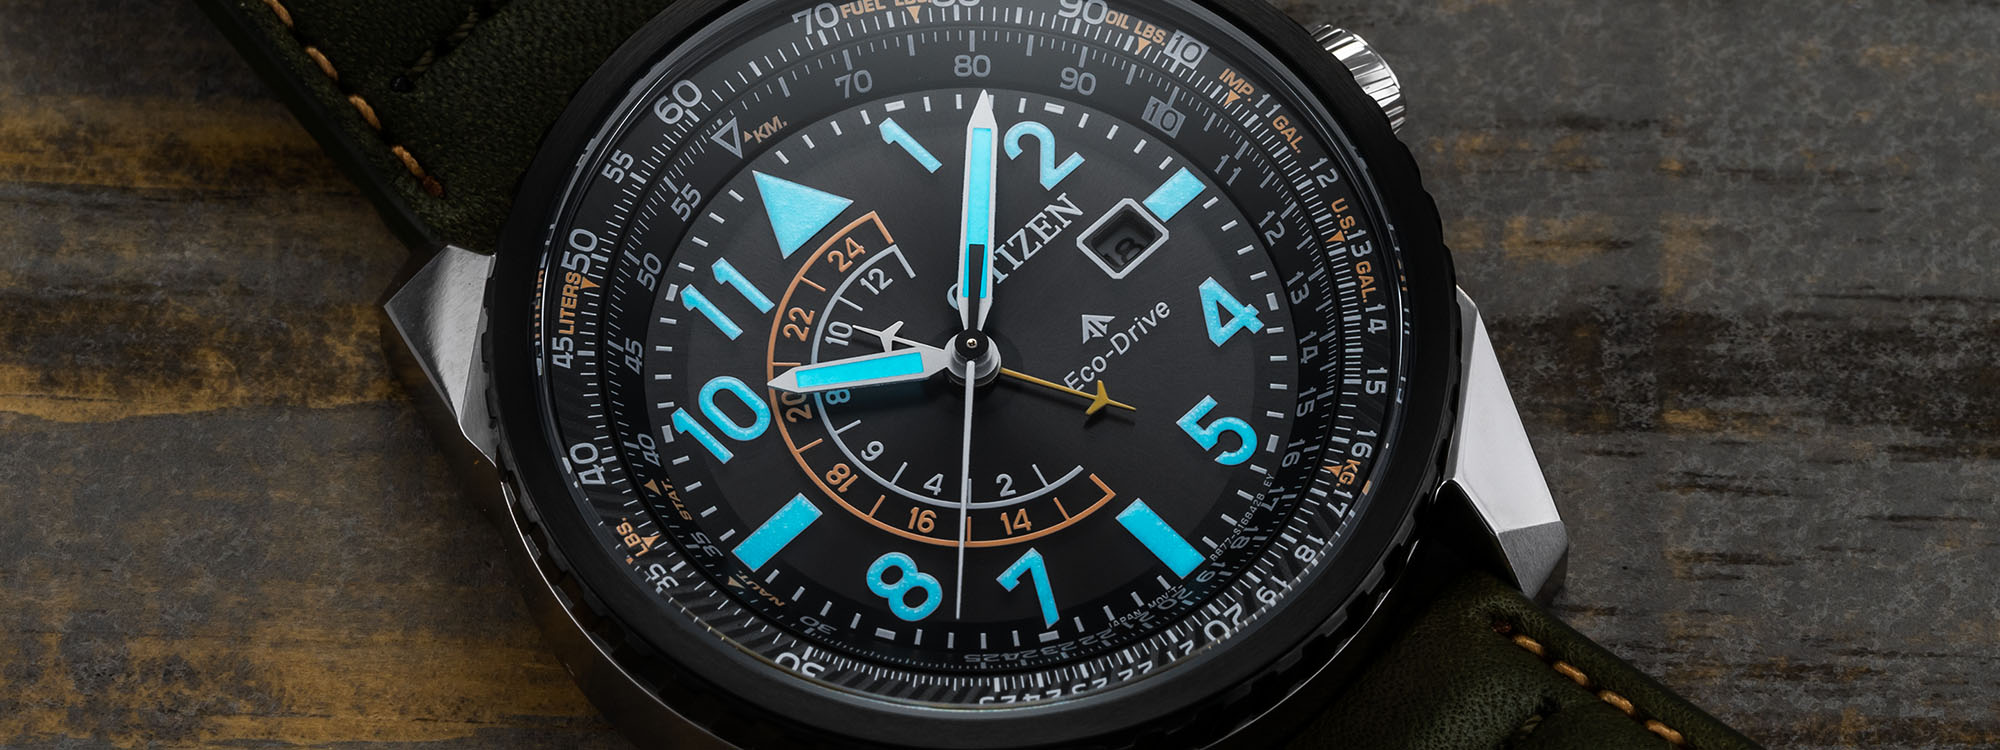 Citizen Watch Review: Brand History and Highlights from the Modern